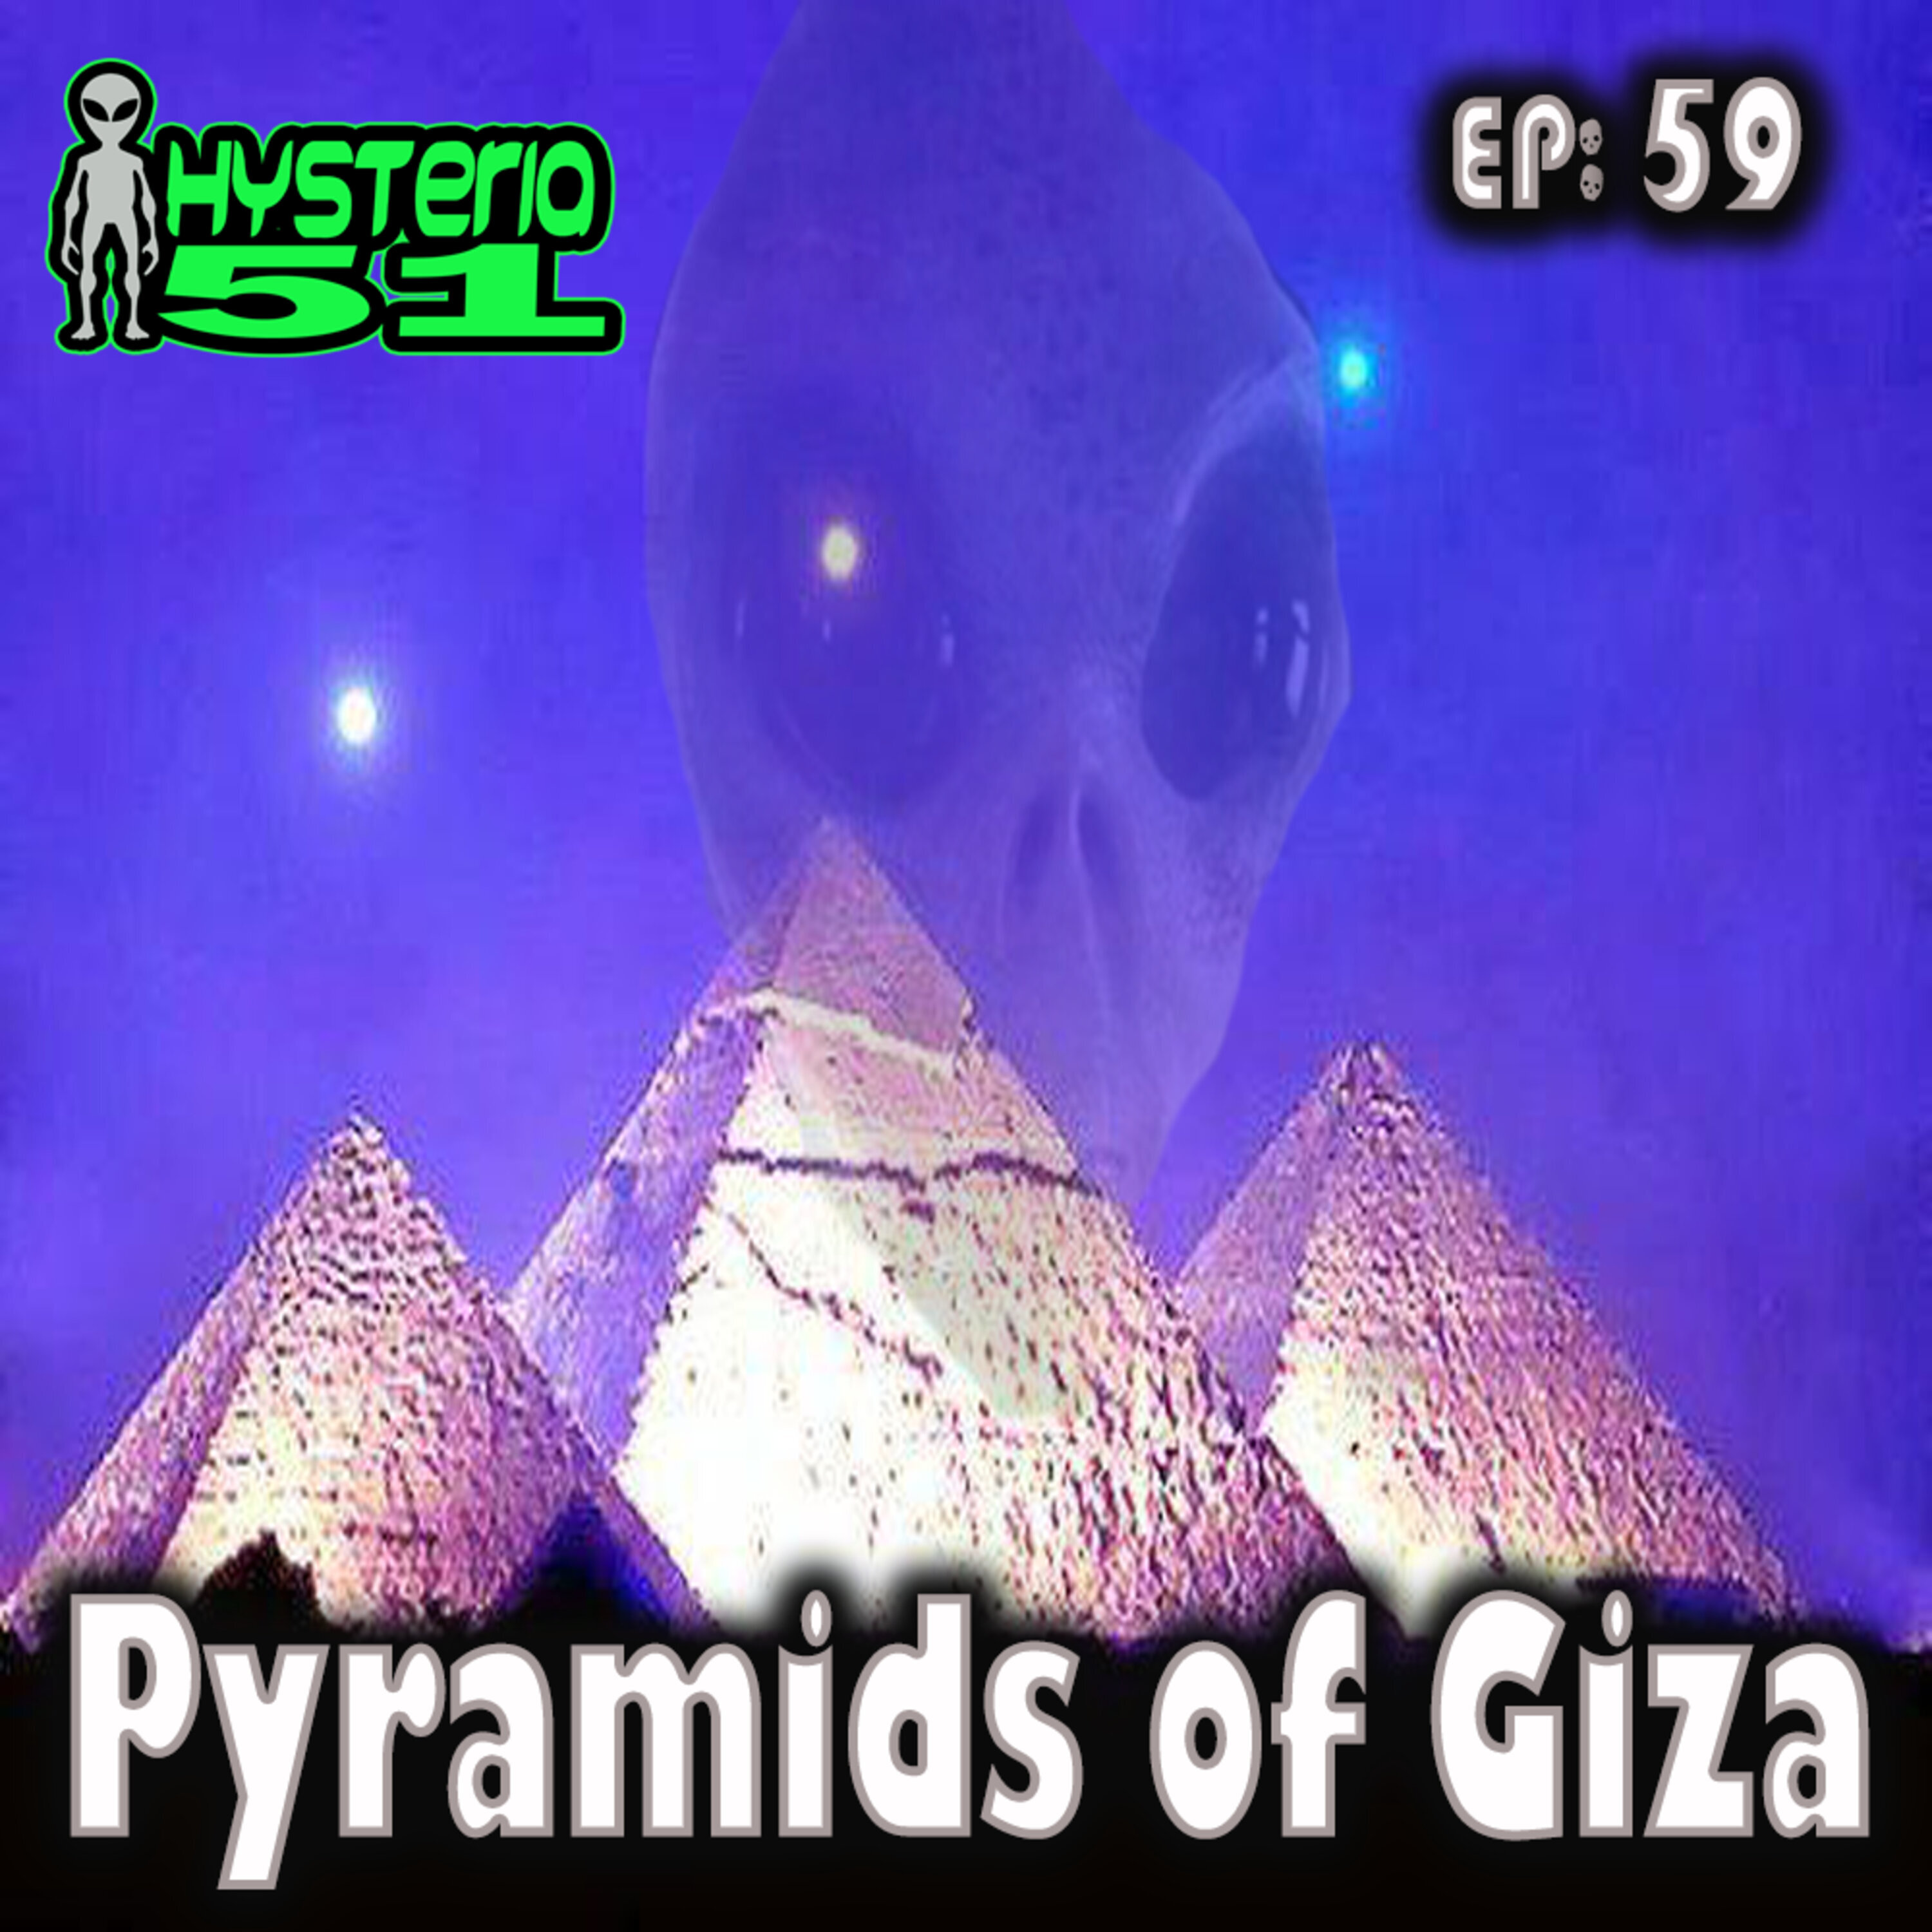 Pyramids of Giza – Egyptian Tombs or Alien Gas Stations? | 59